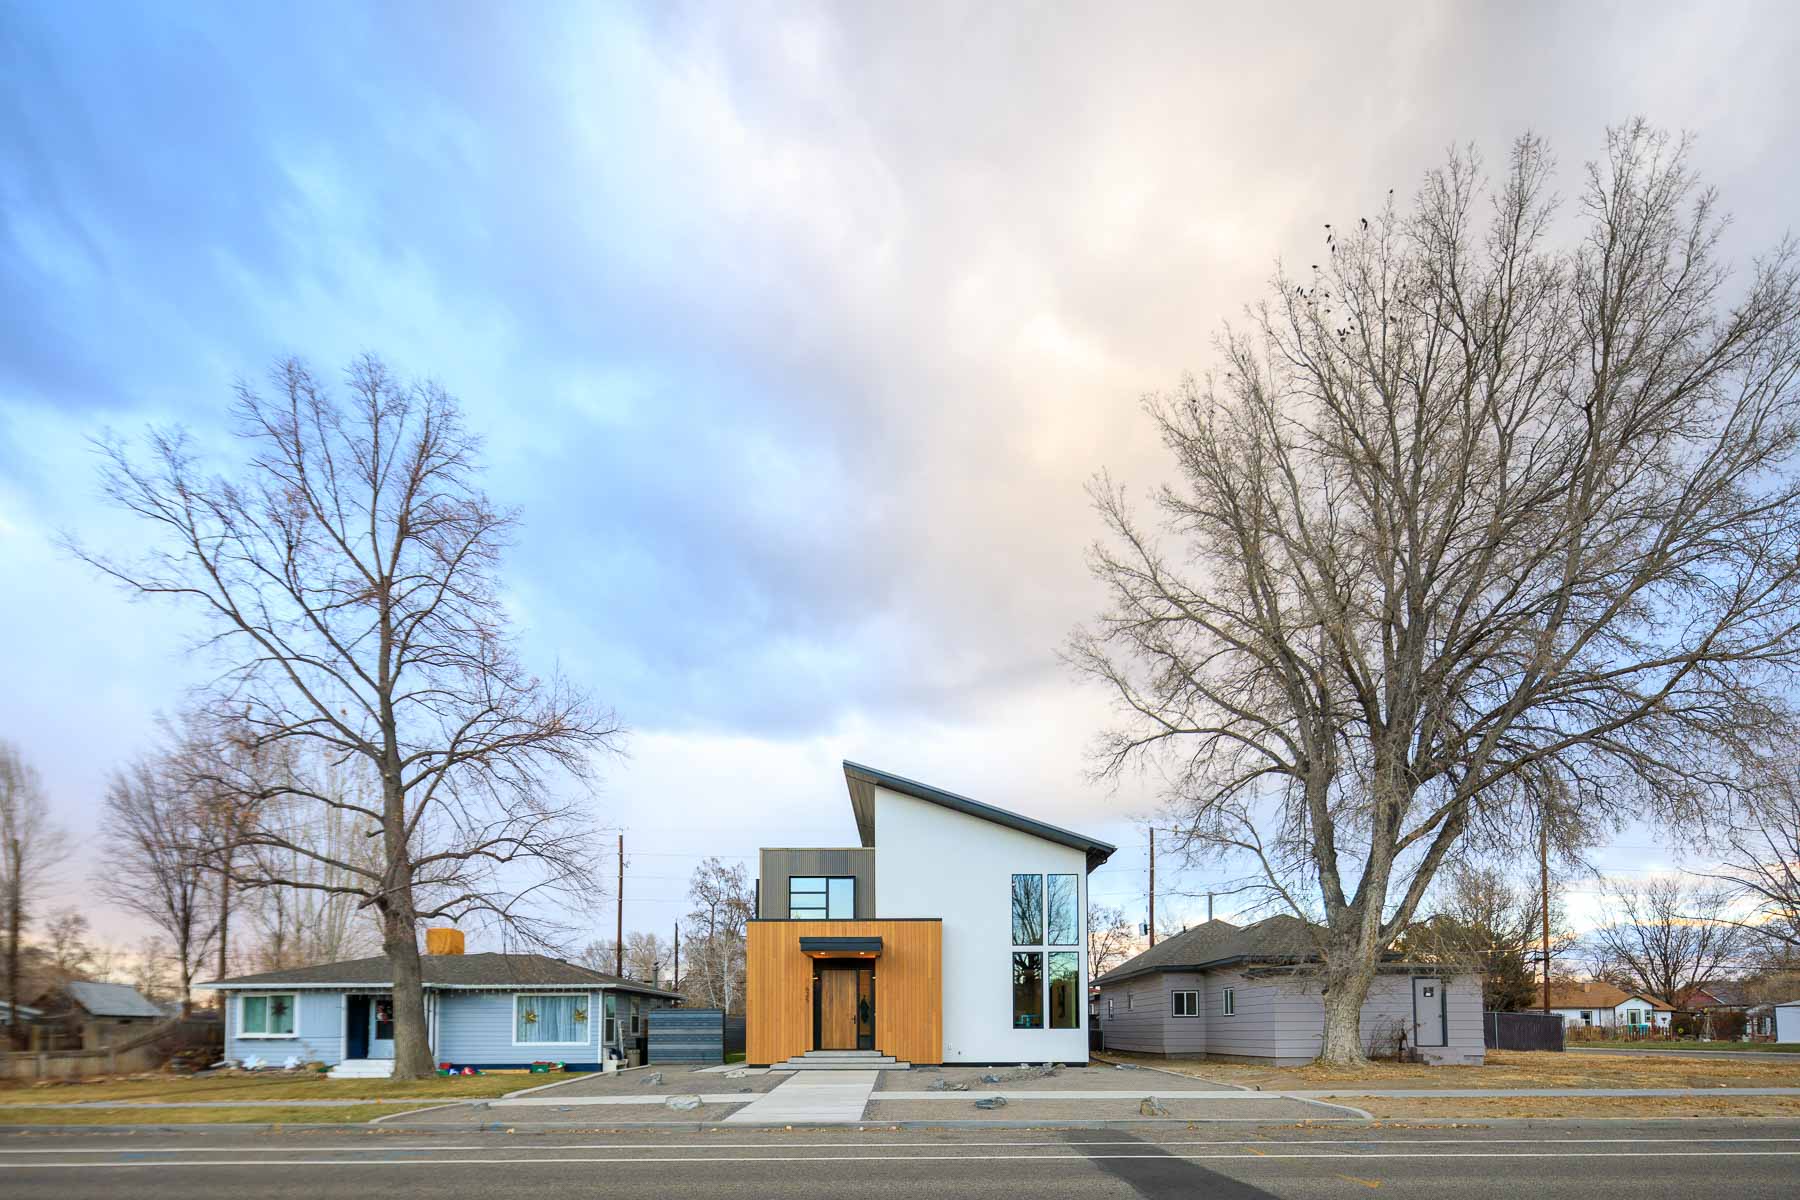 Building a Modern House in a Historic District in Fruita, Colorado